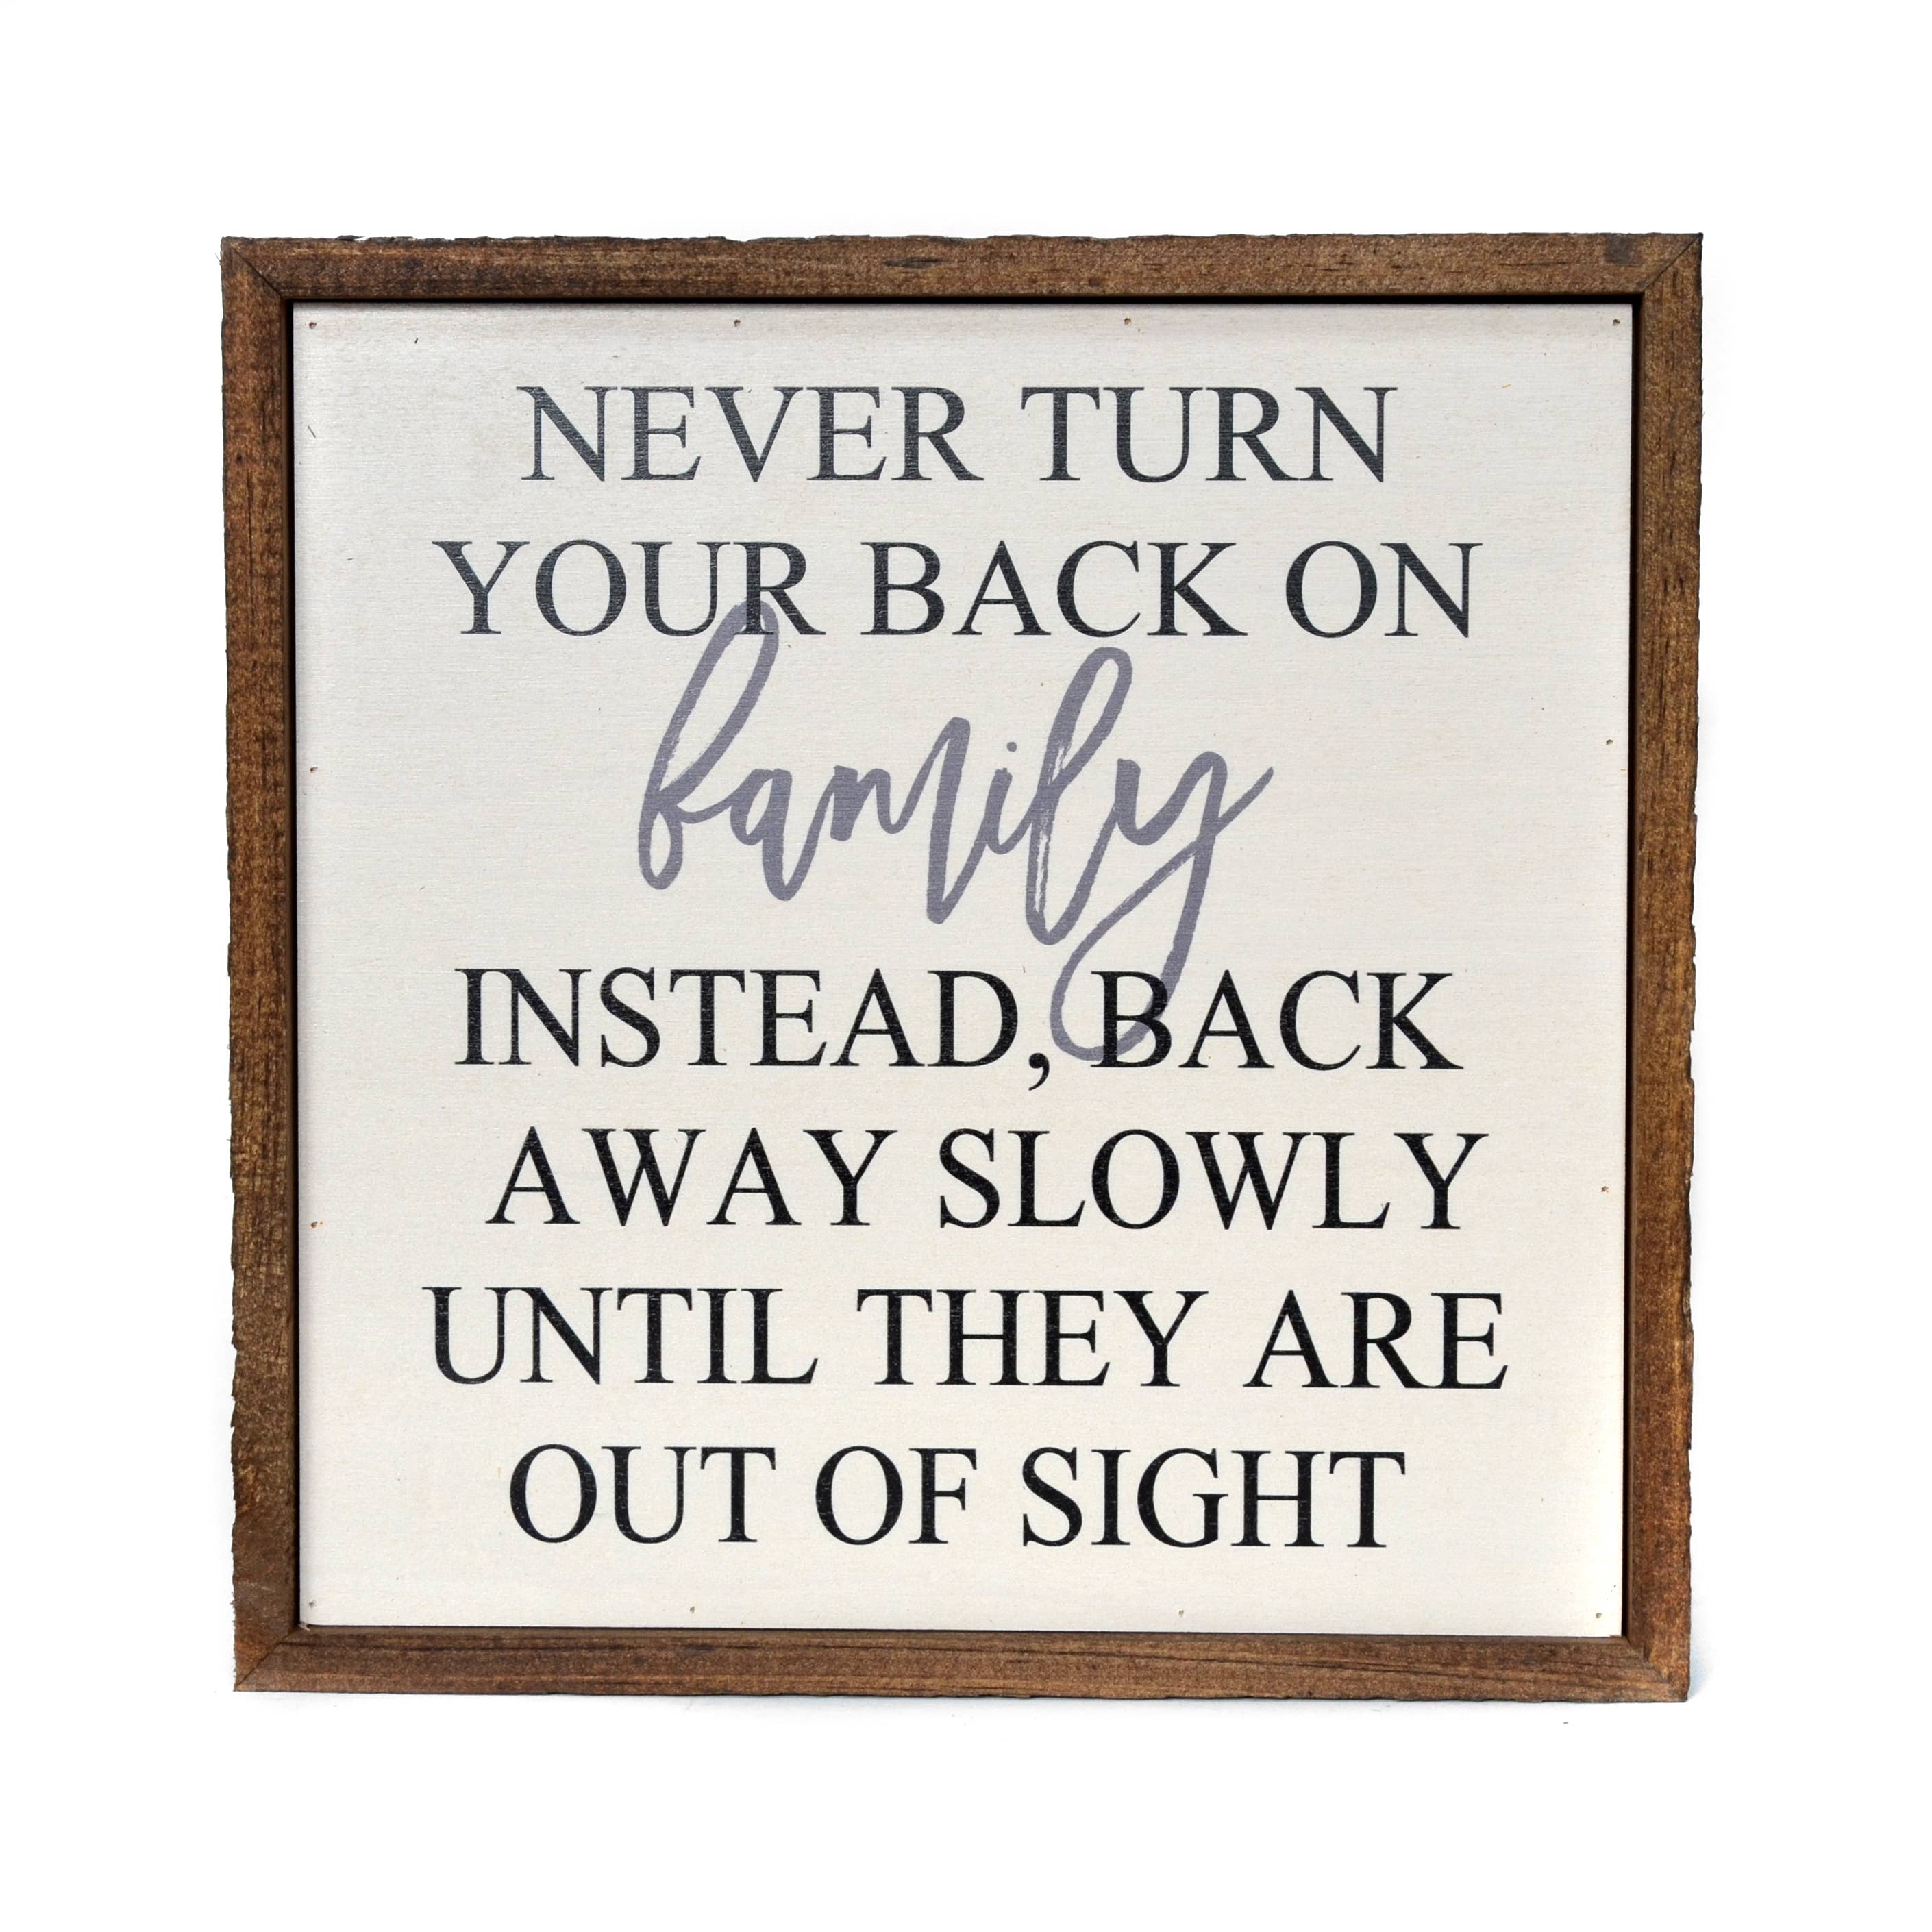 Never Turn Your Back On Family Funny Wooden Sign - $20.00